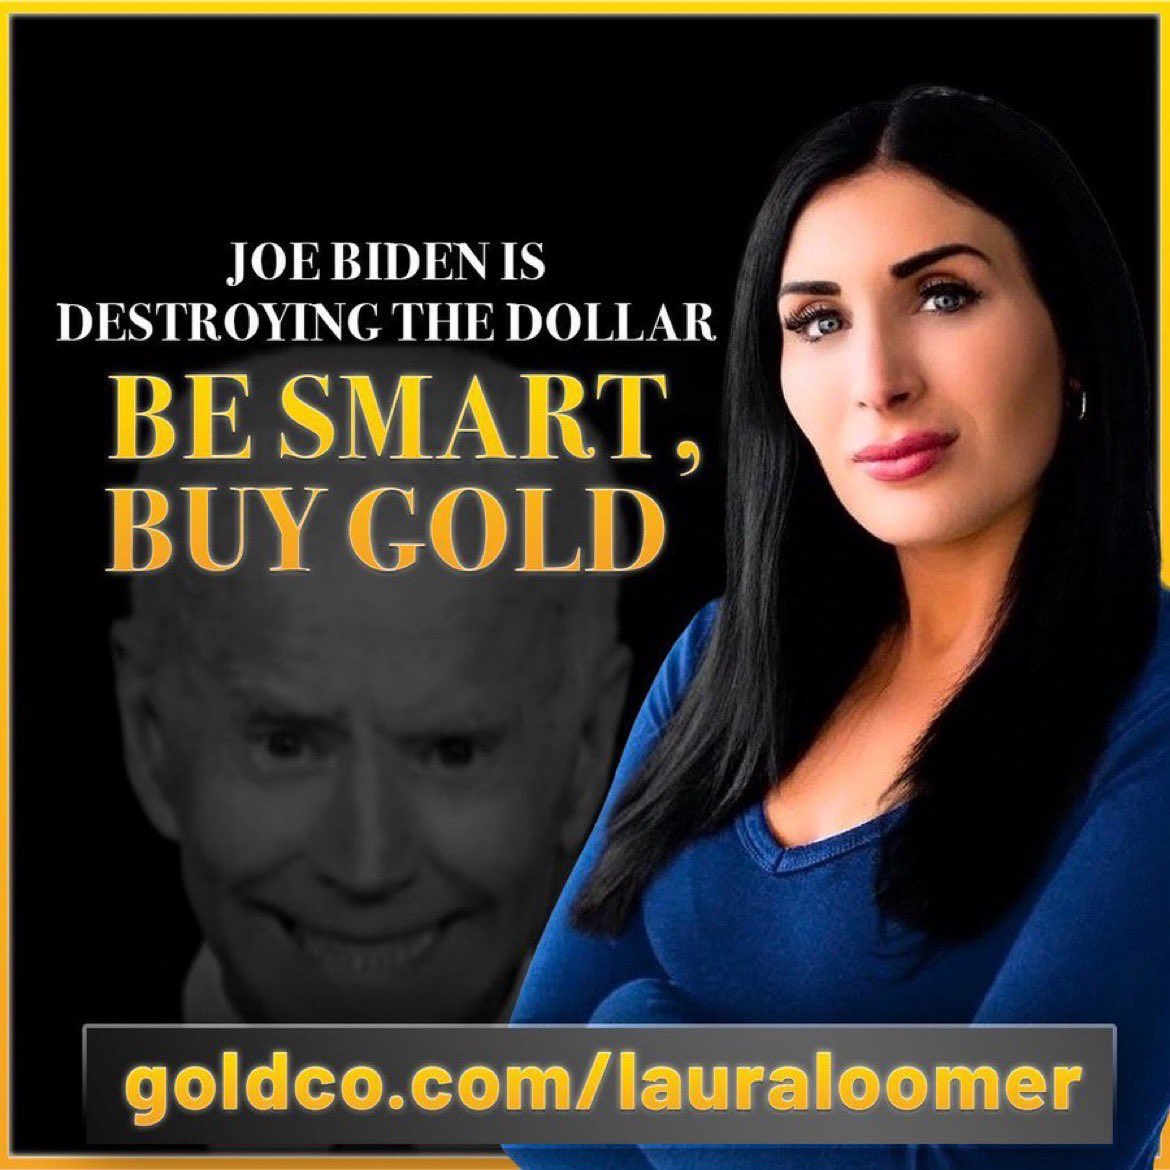 If you enjoy my video reports and my on the ground activism, you can support my work by supporting my sponsor, Goldco. 

Buy GOLD and protect yourself from Bidenomics.  

Click here. Tell them Laura Loomer sent you!
goldco.com/lauraloomer